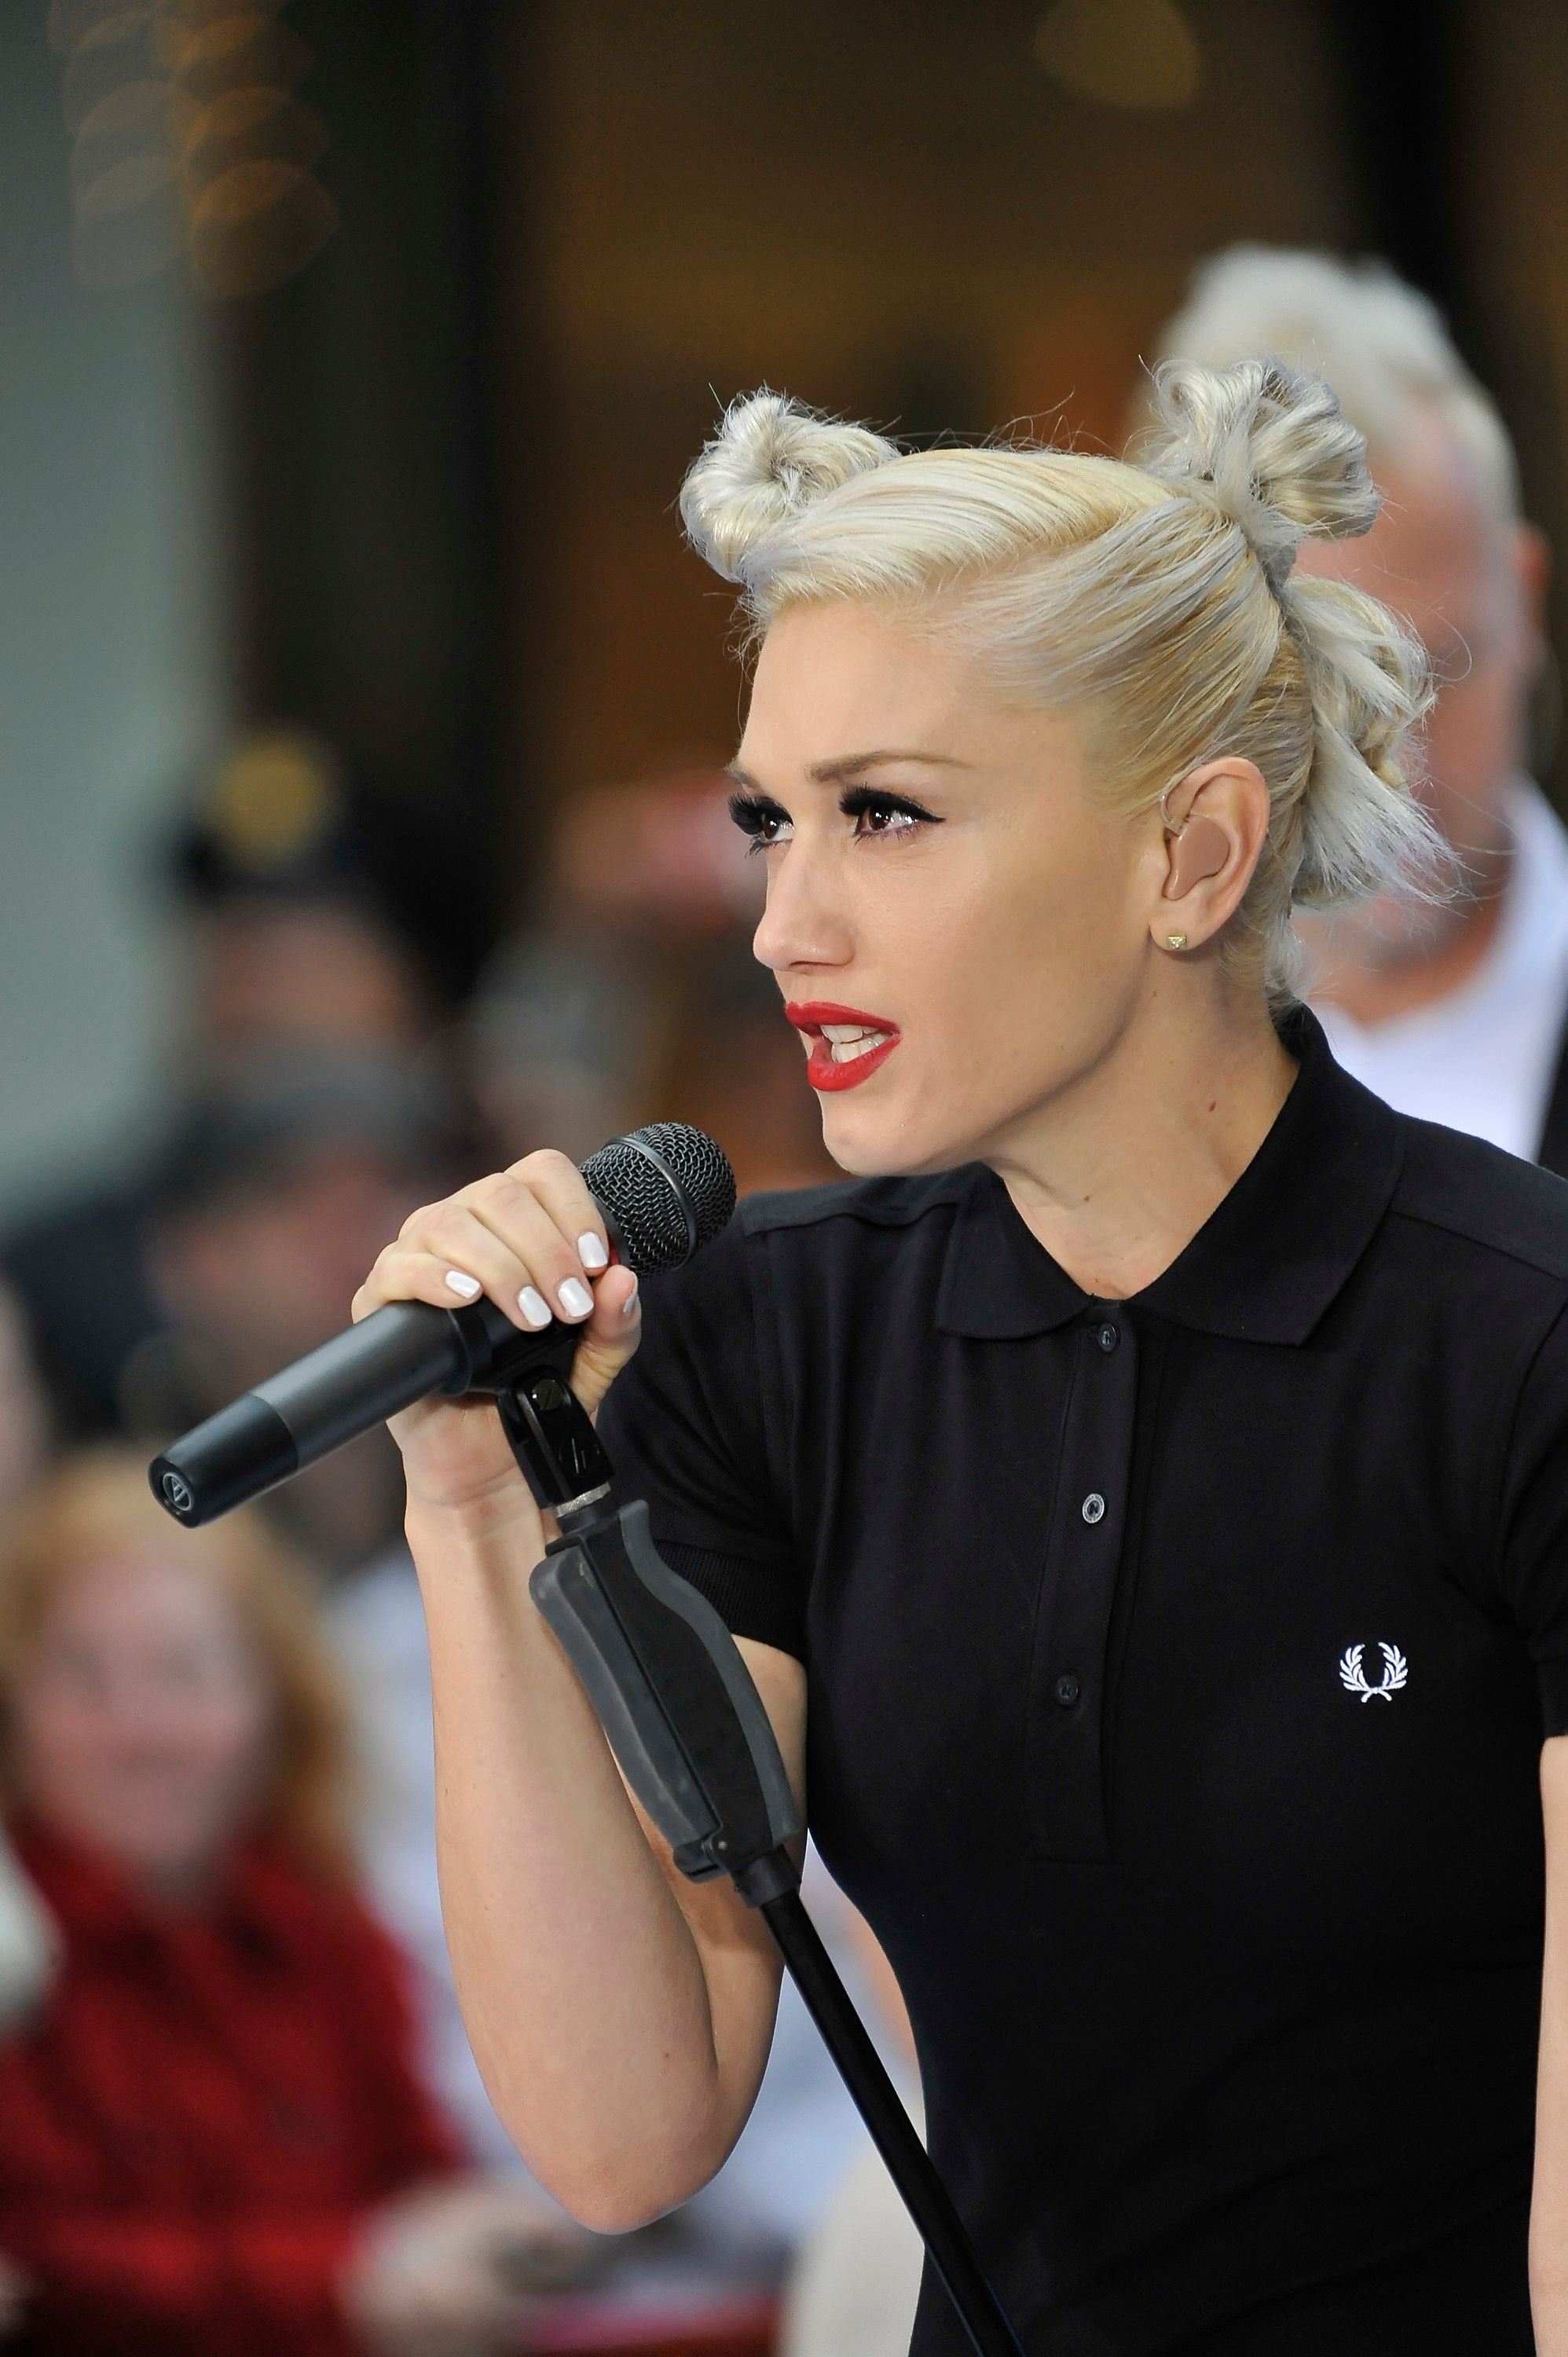 Gwen Stefani of on ABC's "Today" show at Rockefeller Center on May 1, 2009 in New York City. | Source: Getty Images